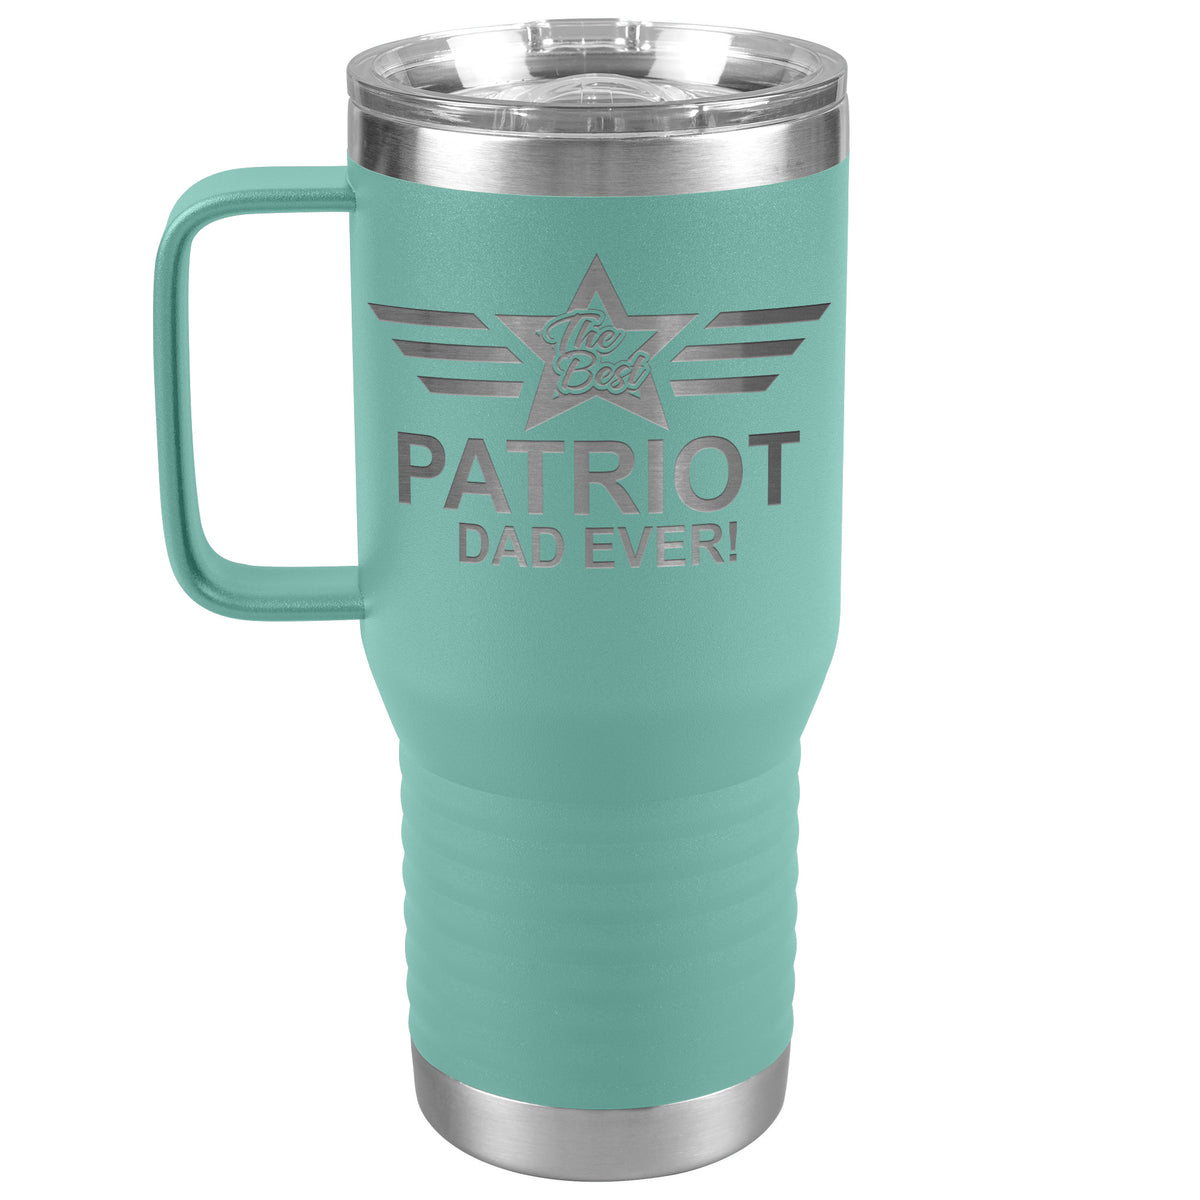 The Best Patriot Dad Ever - 20oz Handle Tumbler - Free Shipping